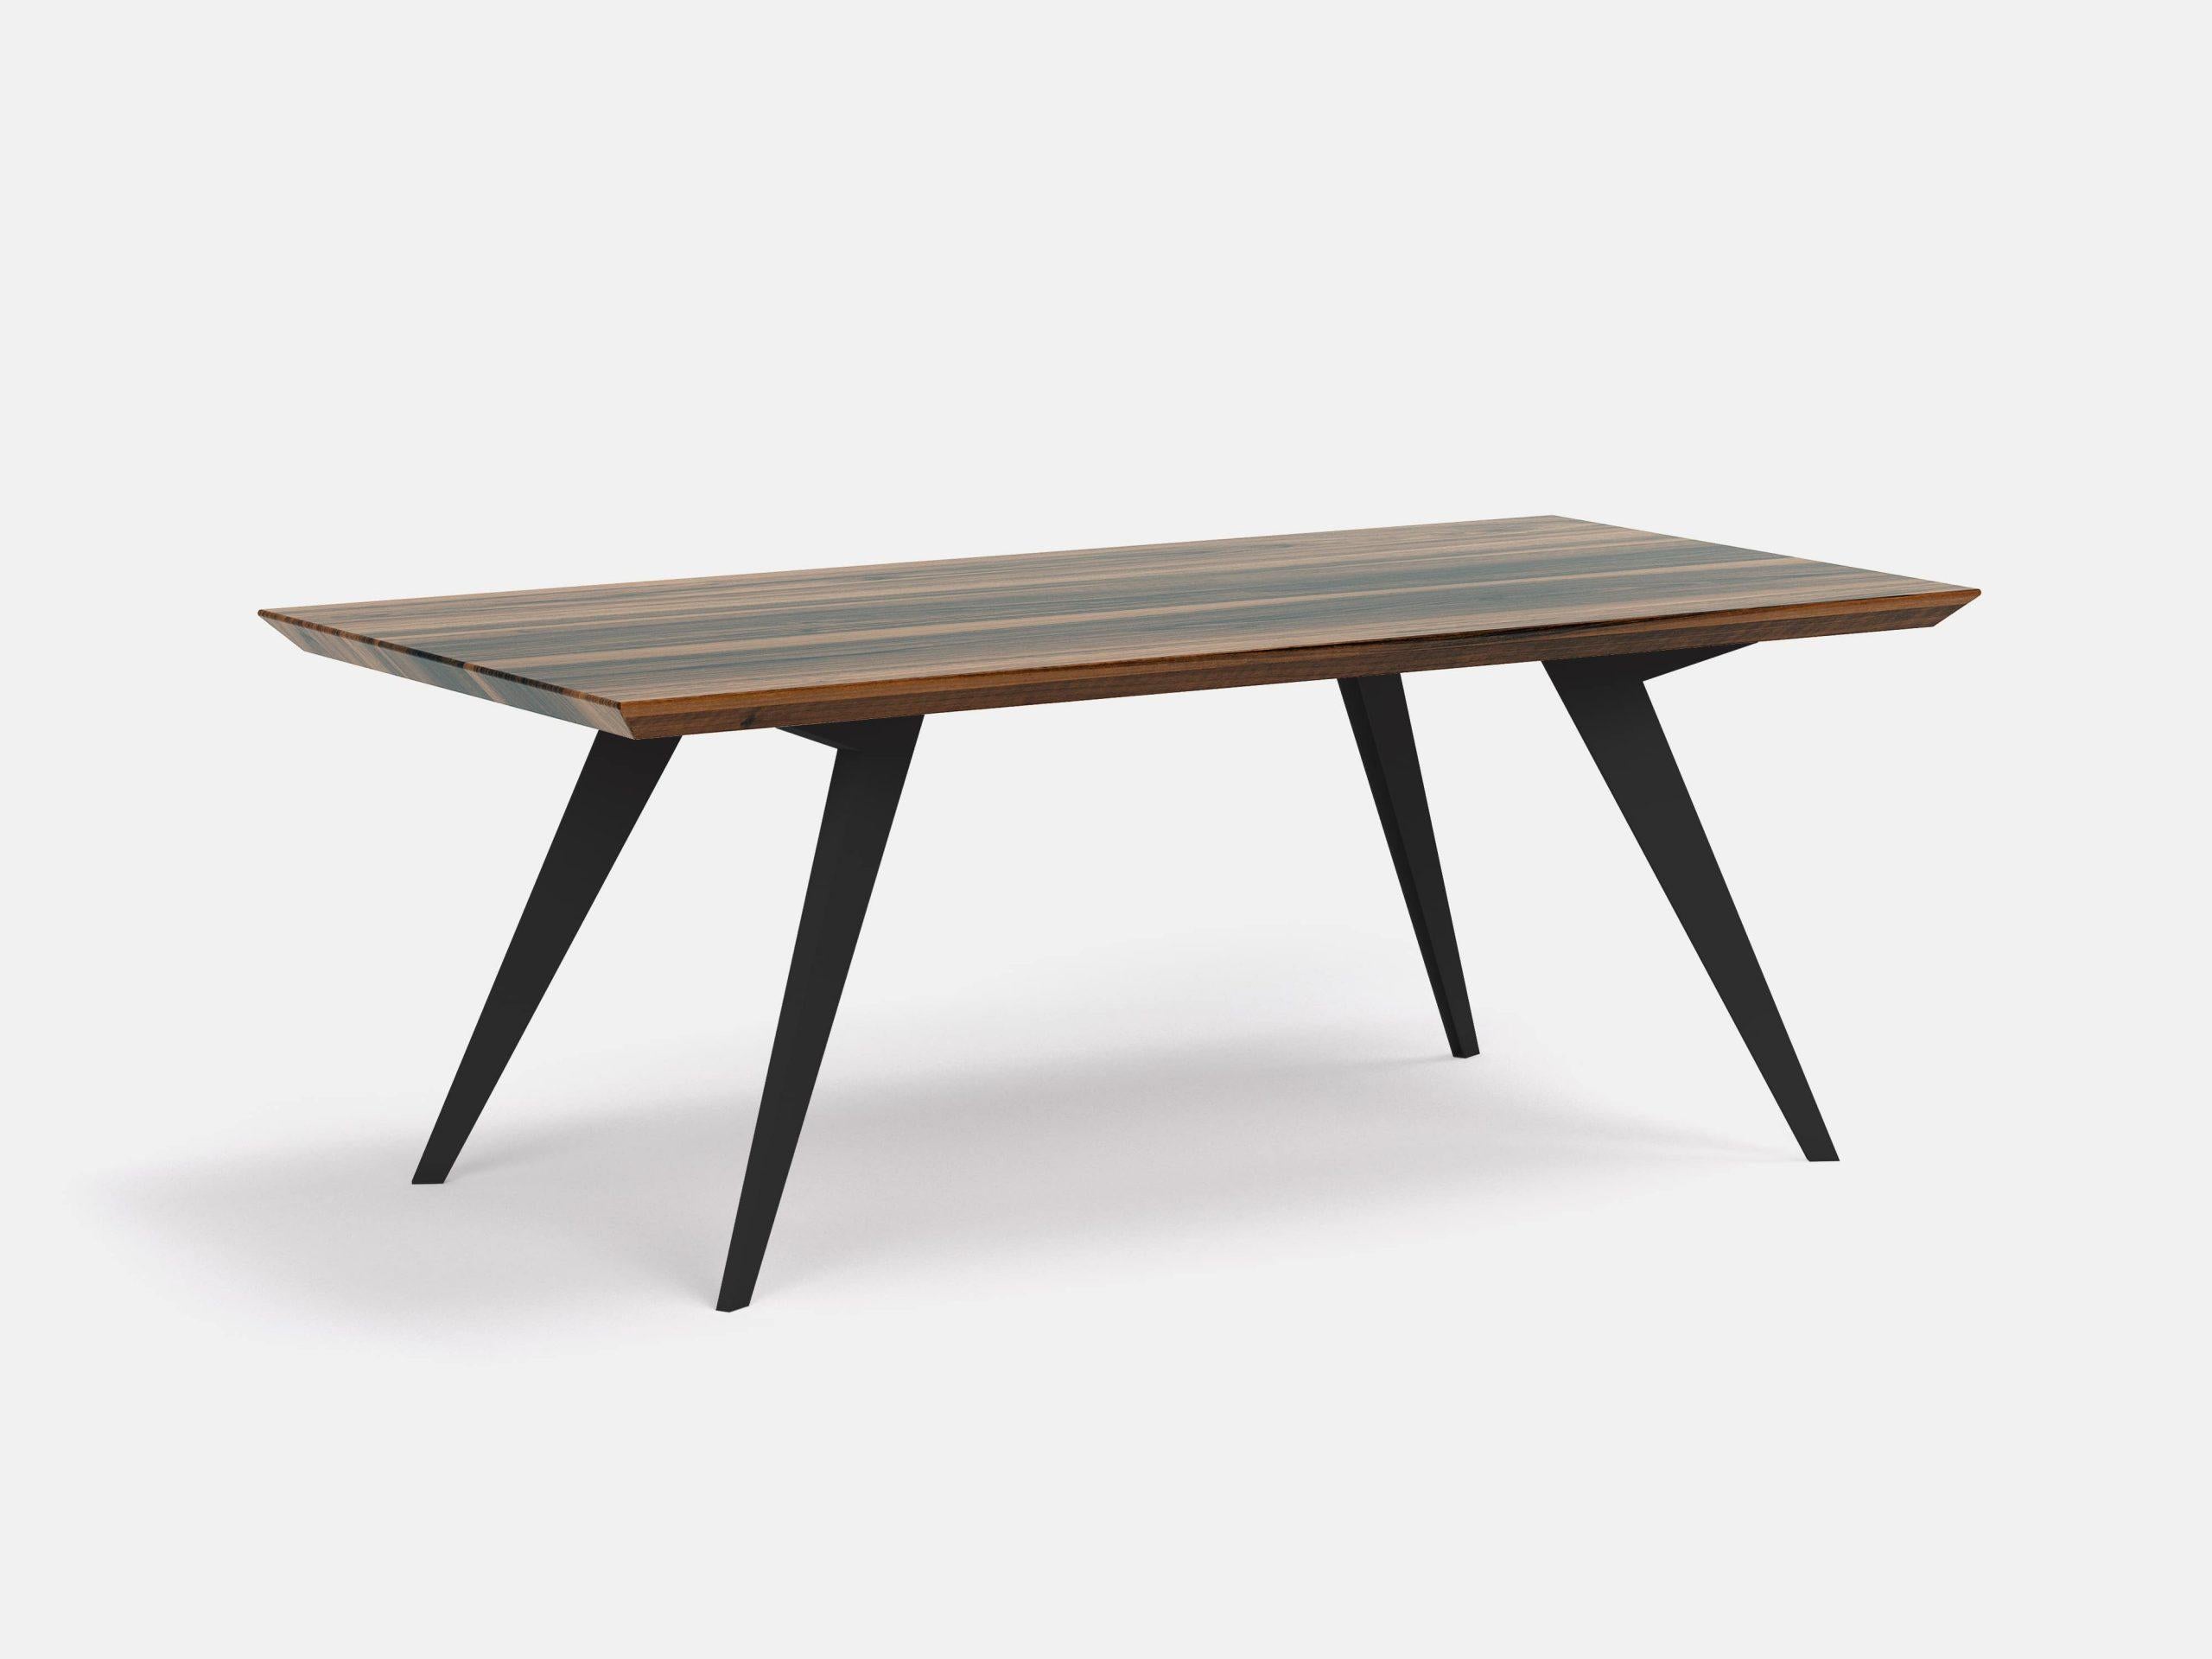 Walnut and steel Minimalist 400 dining table
Dimensions: W 400 x D 100 x H 75 cm
Materials: American walnut 100% solid wood and steel legs
Dimensions available: 160, 200, 250, 300, 350, 400 cm
Roly-Poly table is the proof that through design we